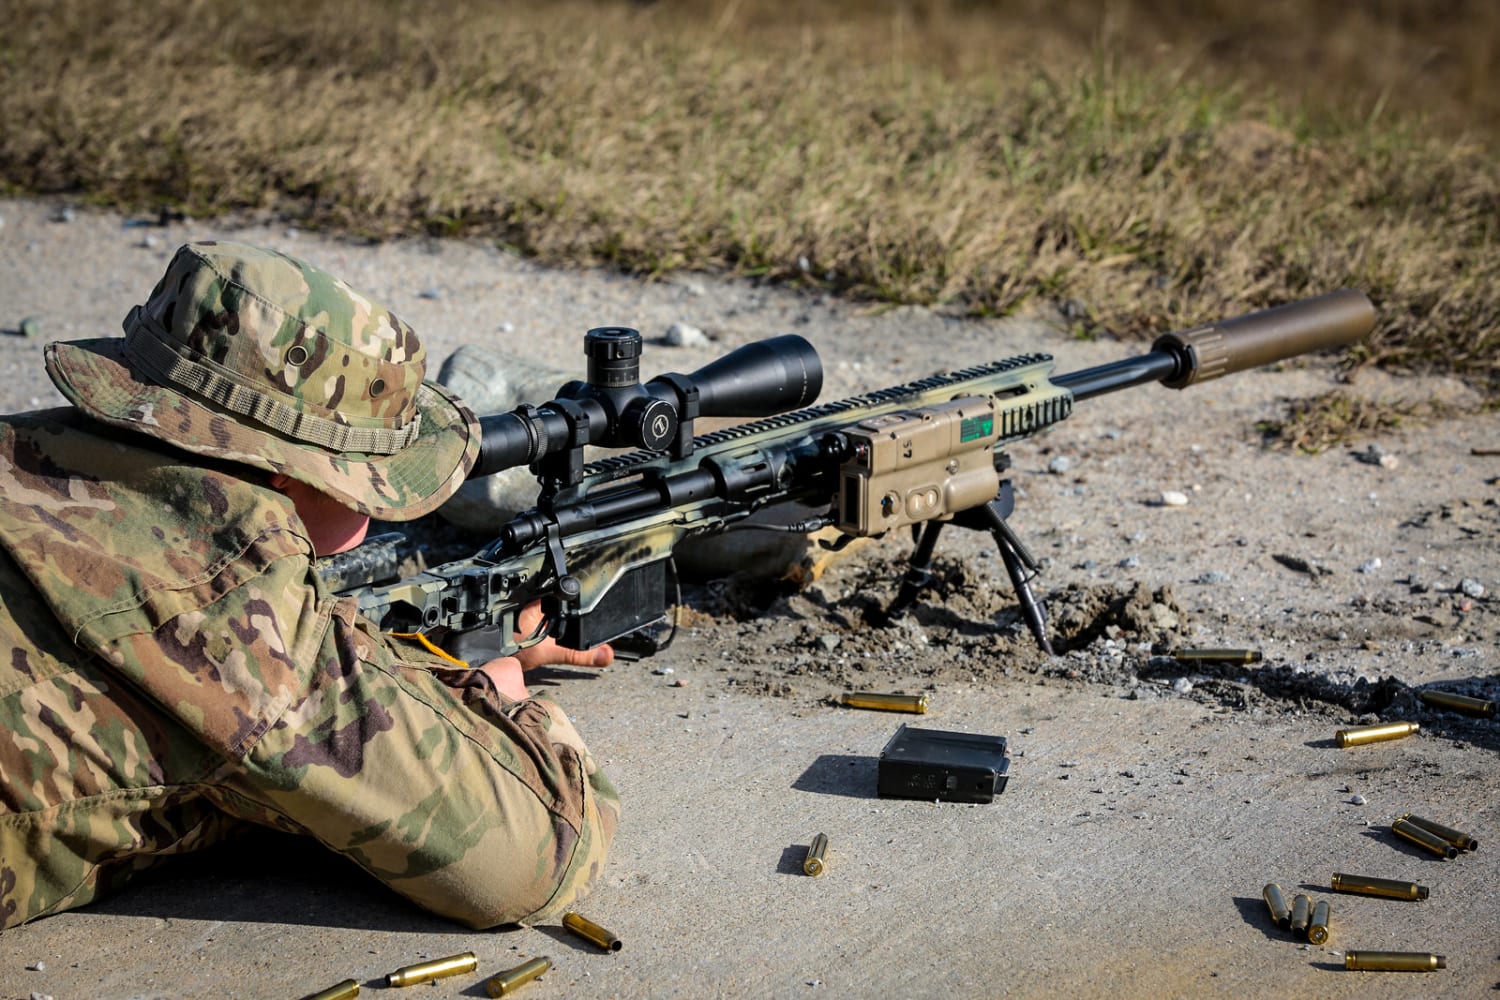 ‘A milestone’: First woman completes Army sniper course